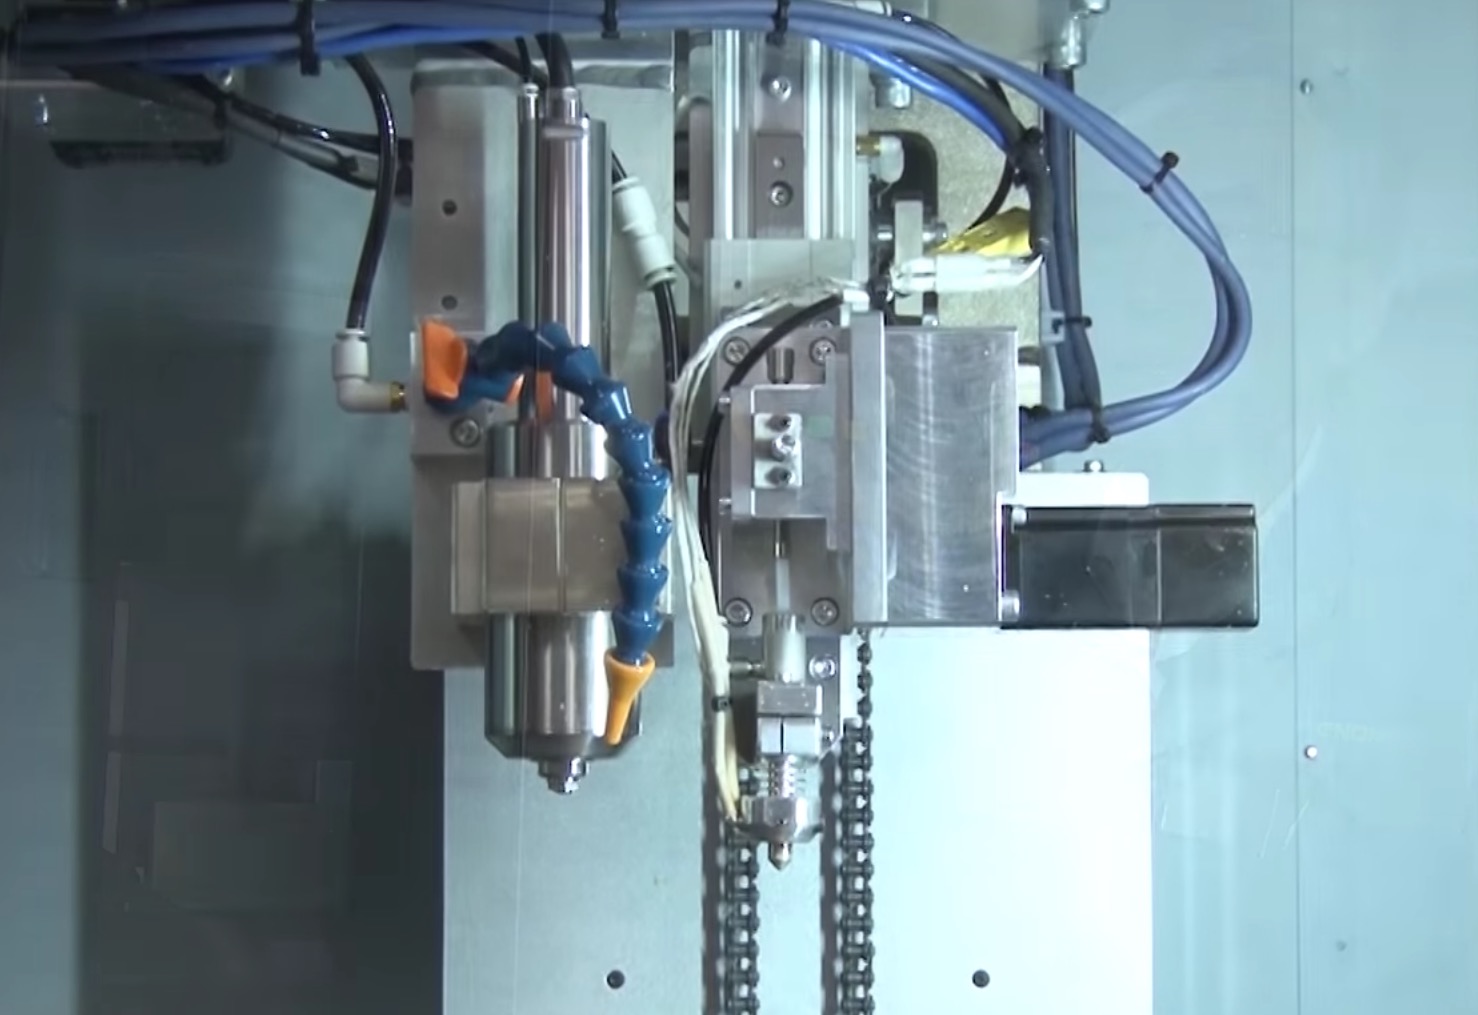  ENOMOTO's hybrid industrial CNC mill and 3D printhead 